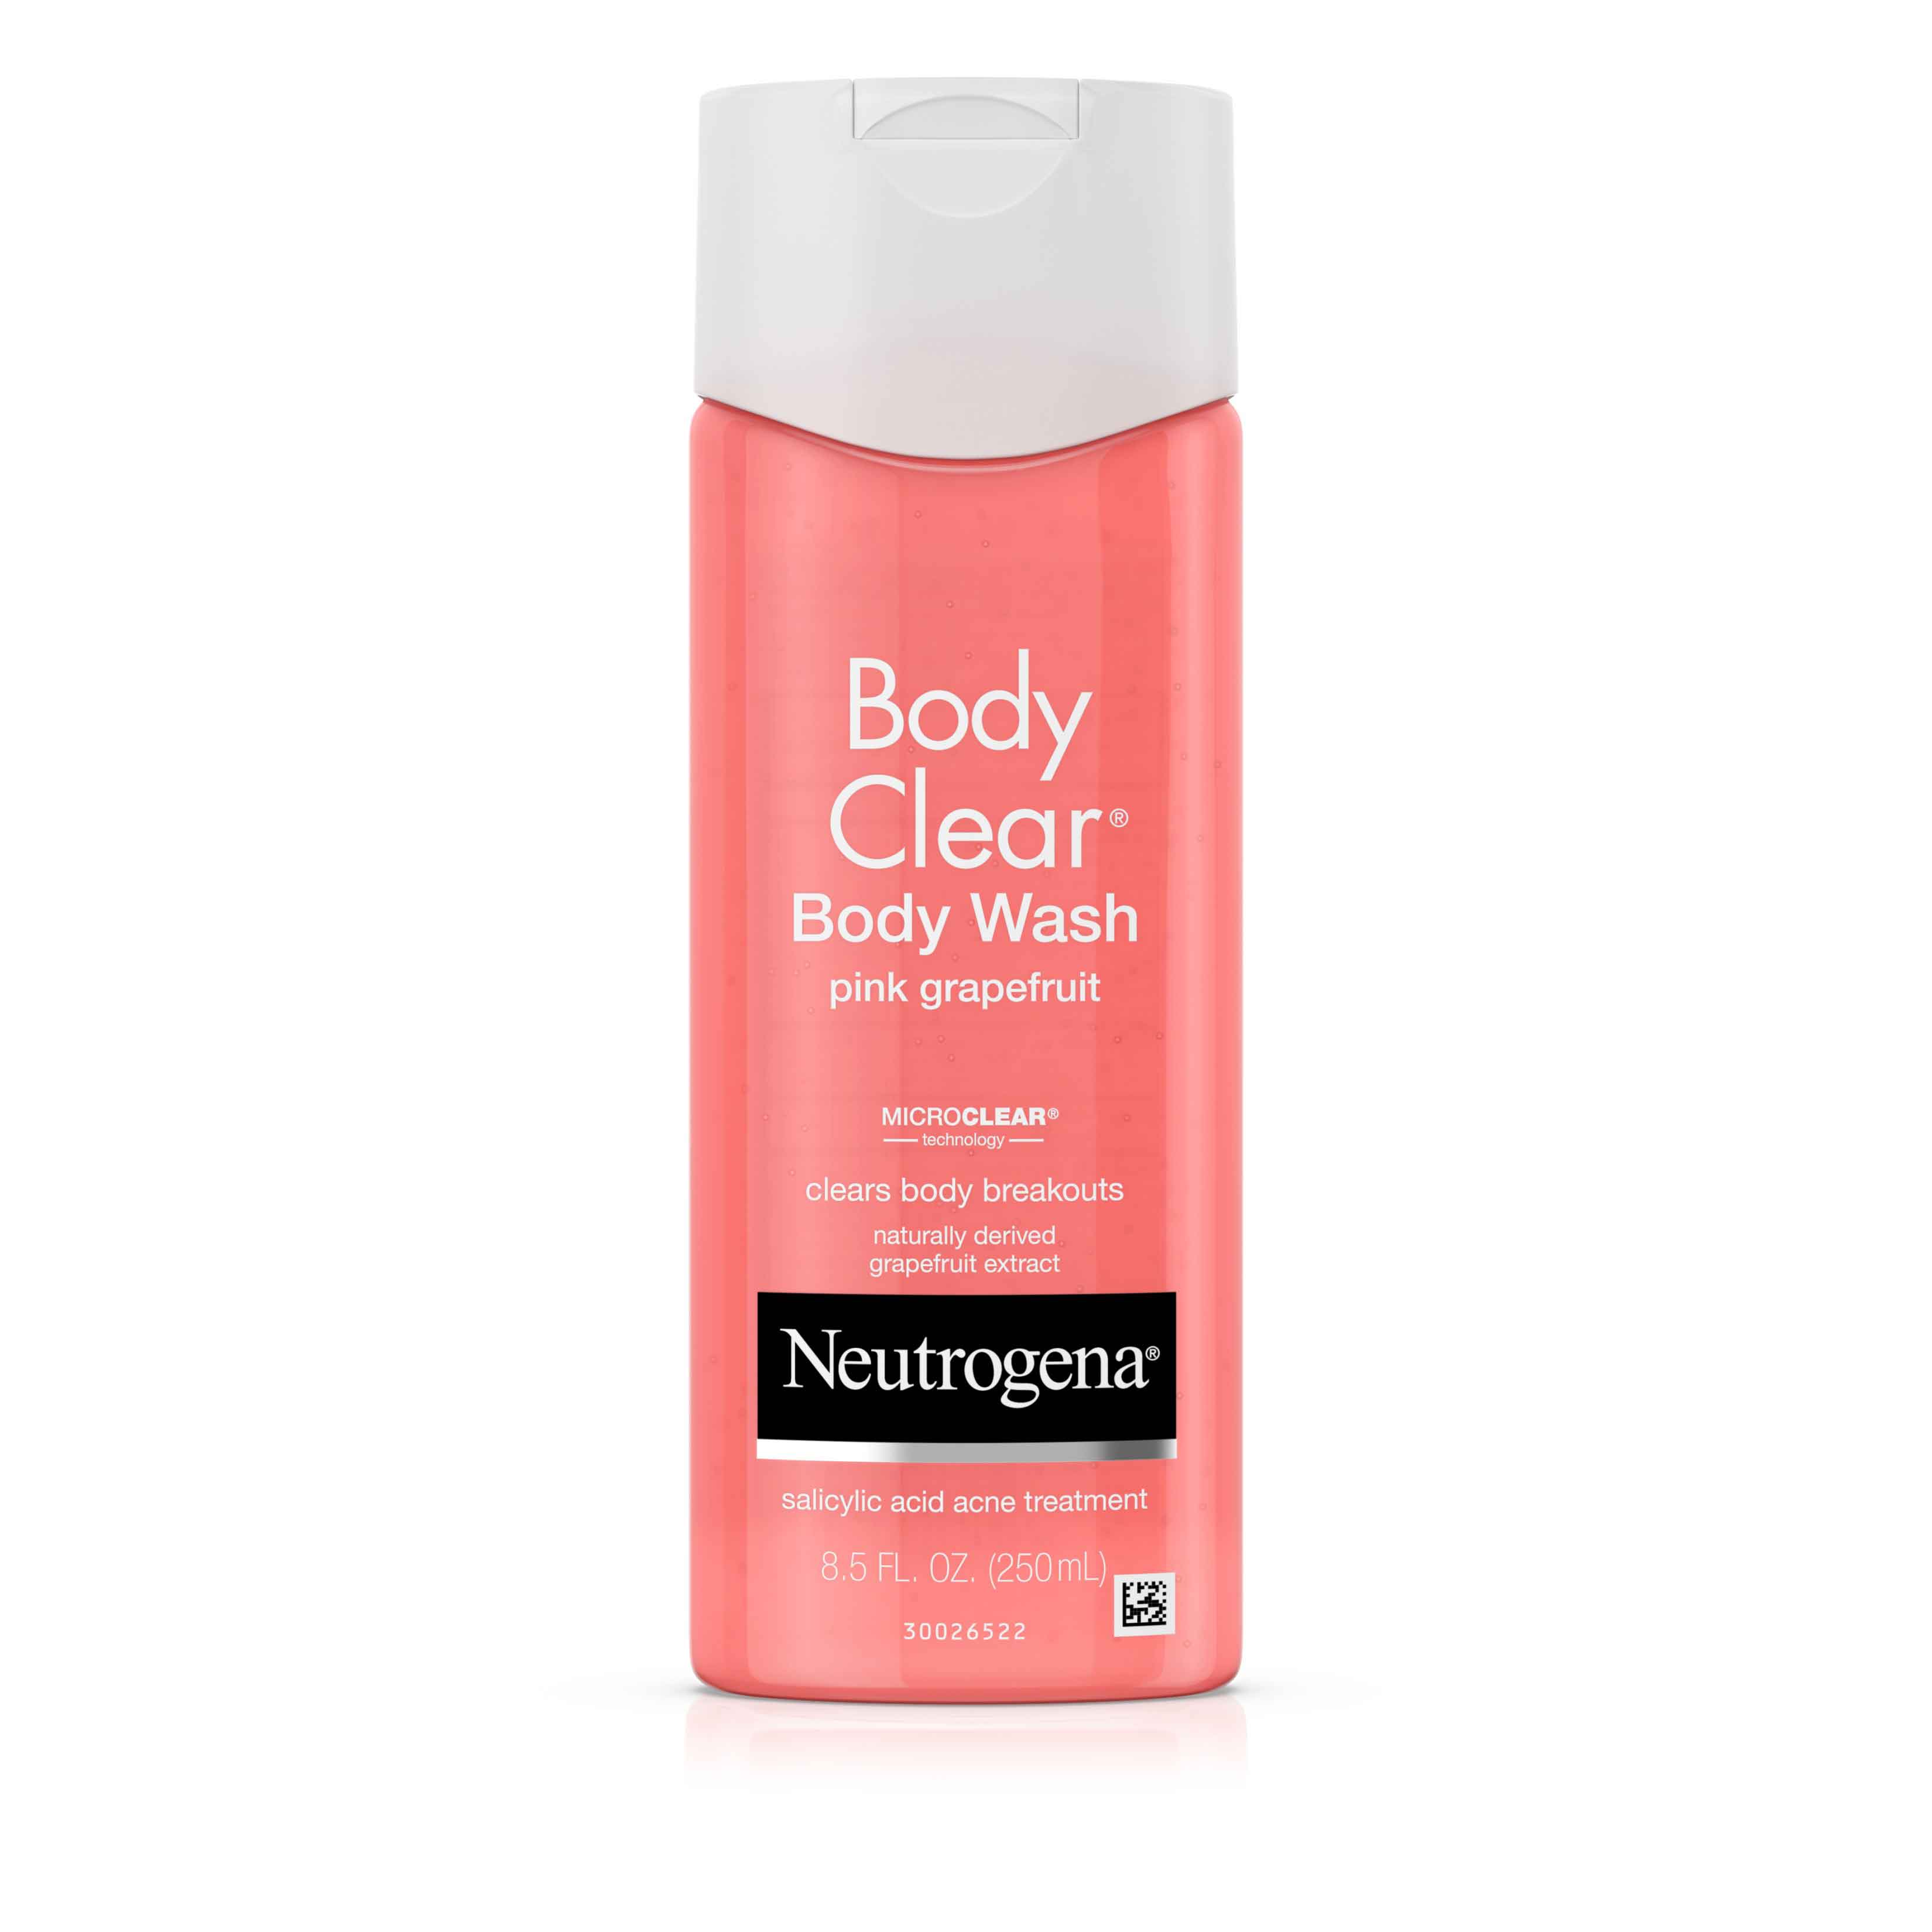 Body Clear® Body Wash—Pink Grapefruit